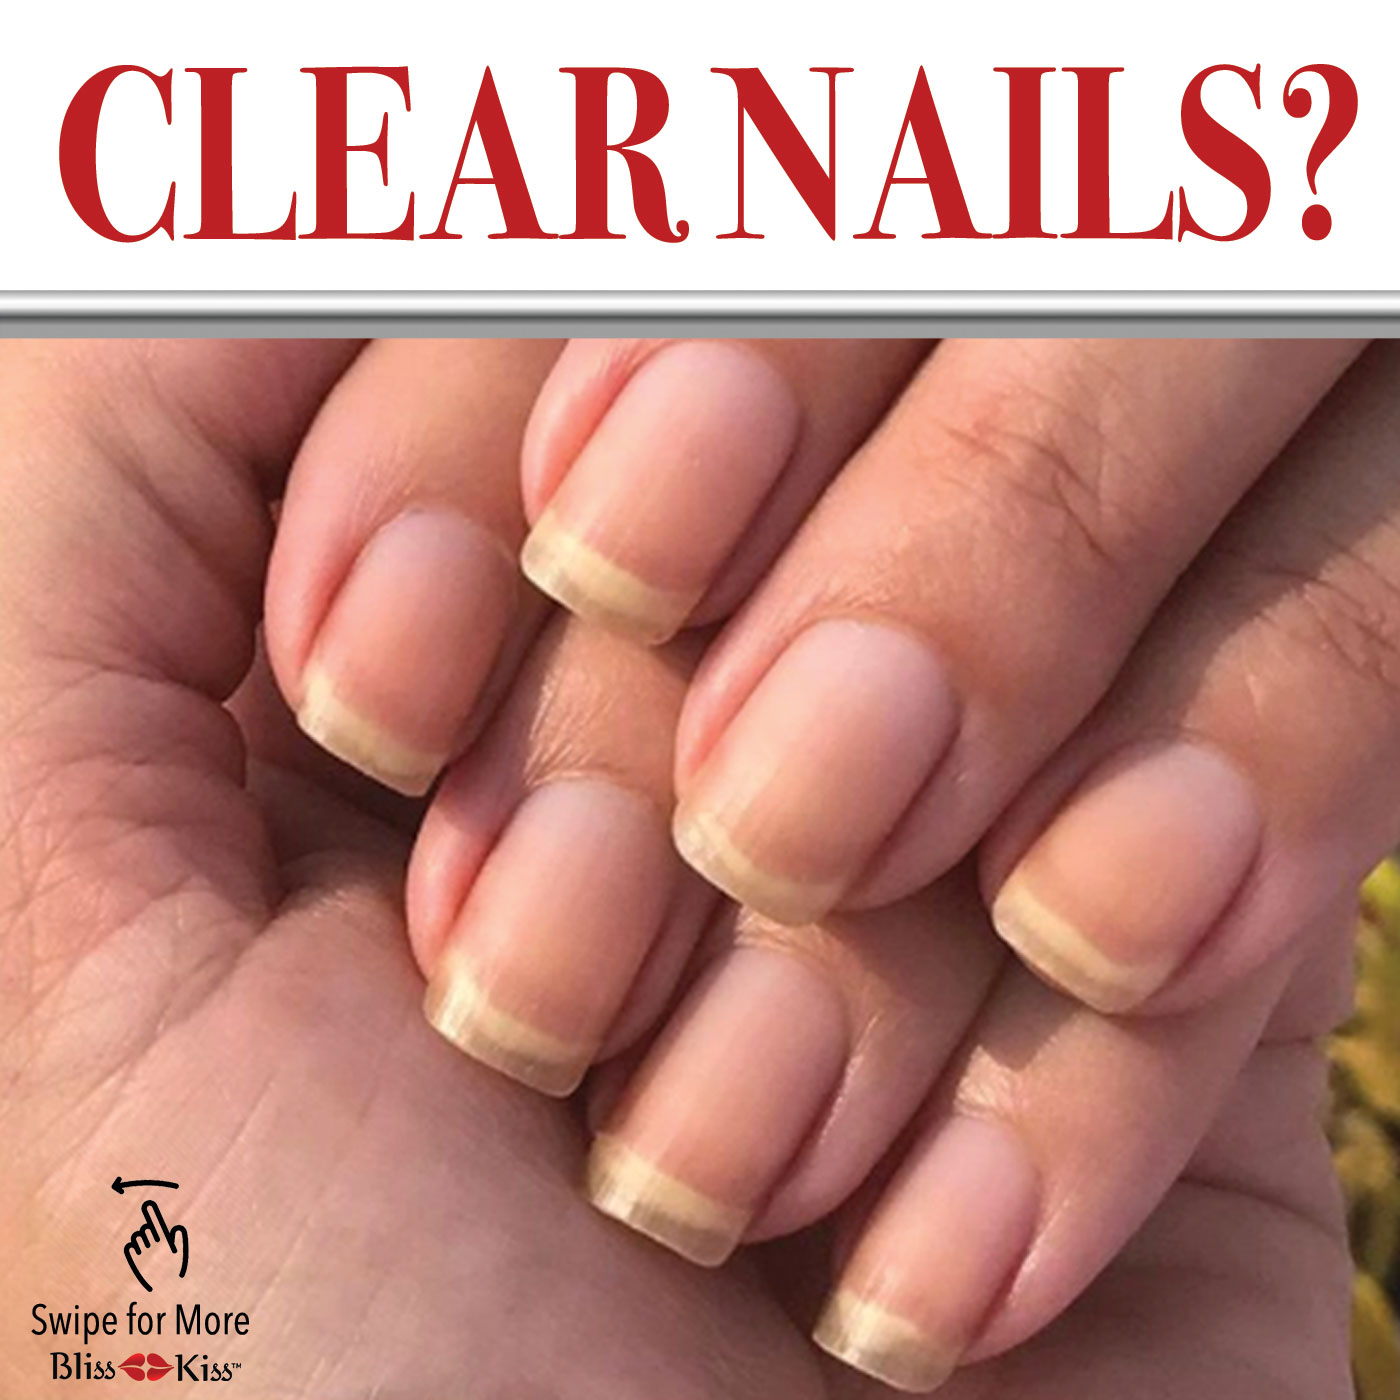 Are Clear Nails Bad? - Bliss Kiss by Finely Finished, LLC